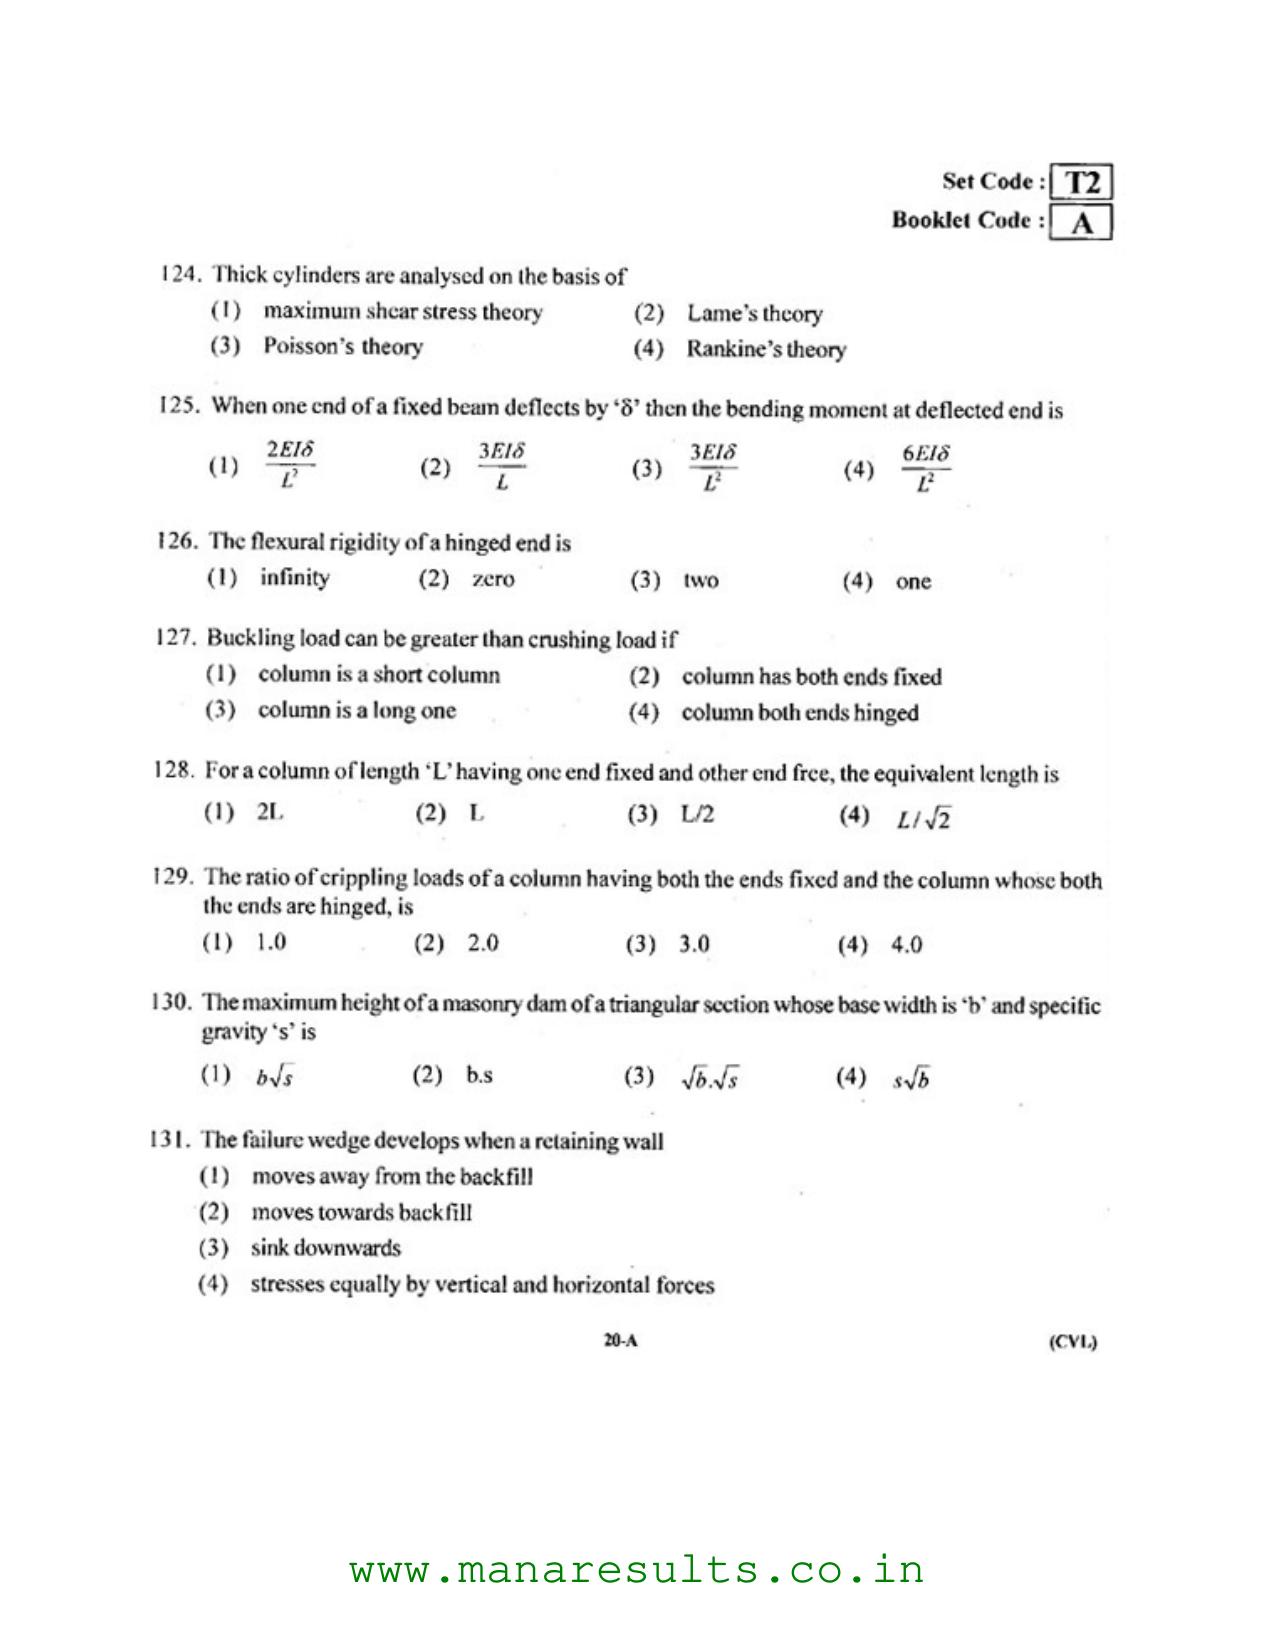 AP ECET 2016 Civil Engineering Old Previous Question Papers - Page 19